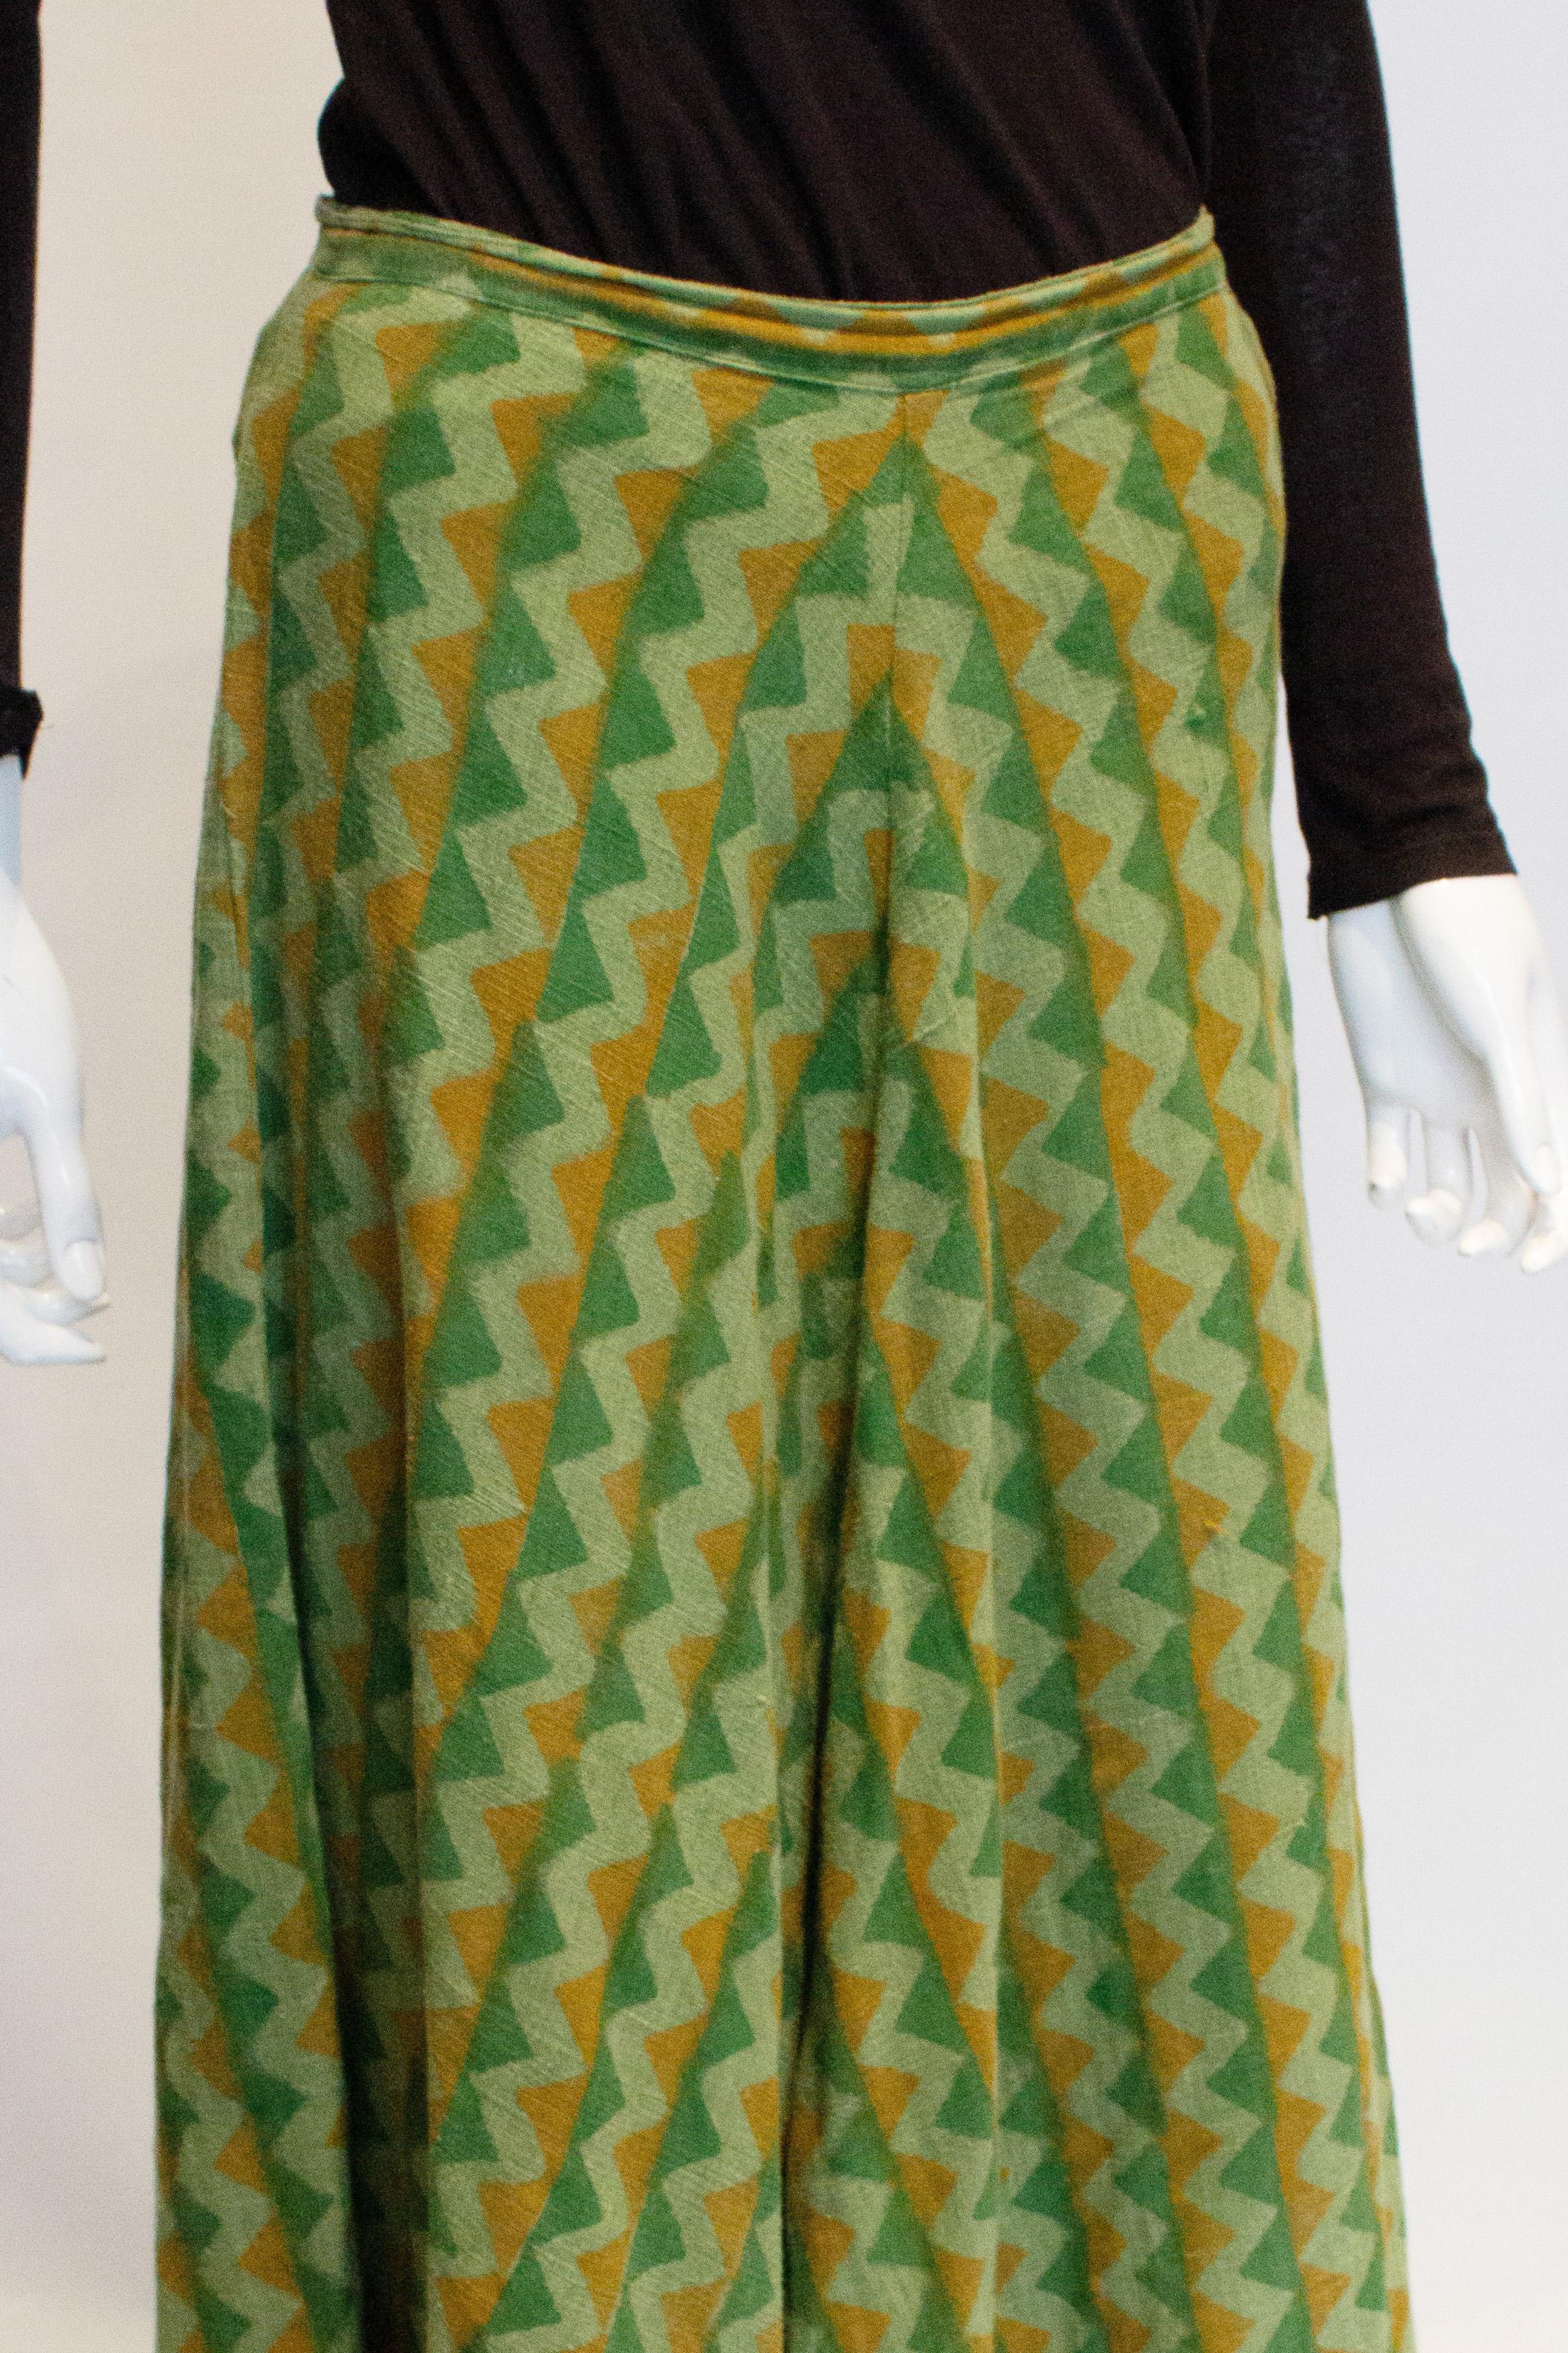 A great vintage skirt for Fall.  The skirt is in a heavy cotton in shades of green and brown with a side button opening. 
Measurements:  waist 29'' ,length 40''